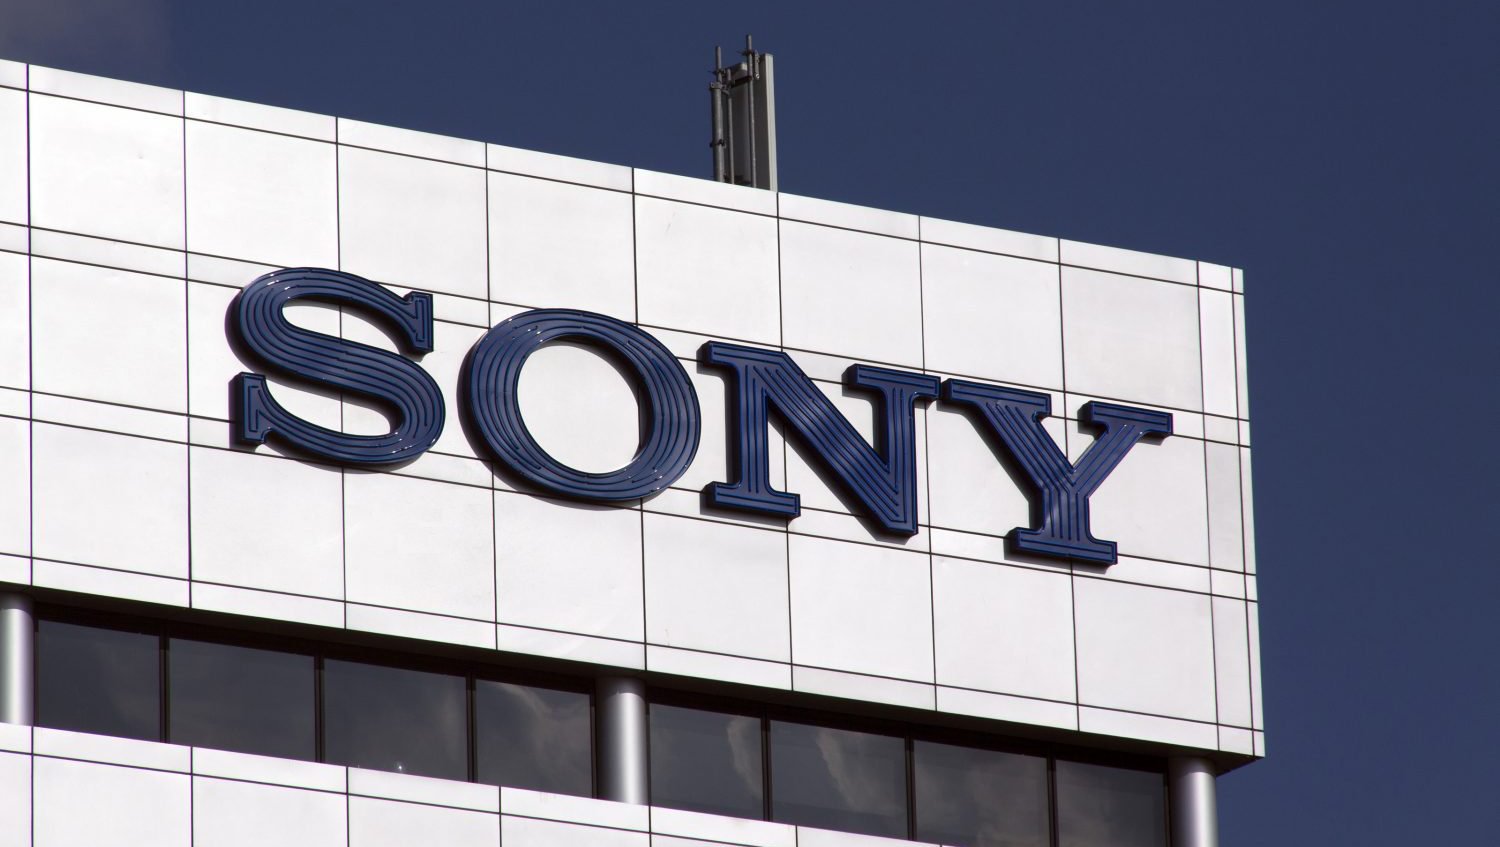 Sony Builds Digital Rights Management System On A Blockchain